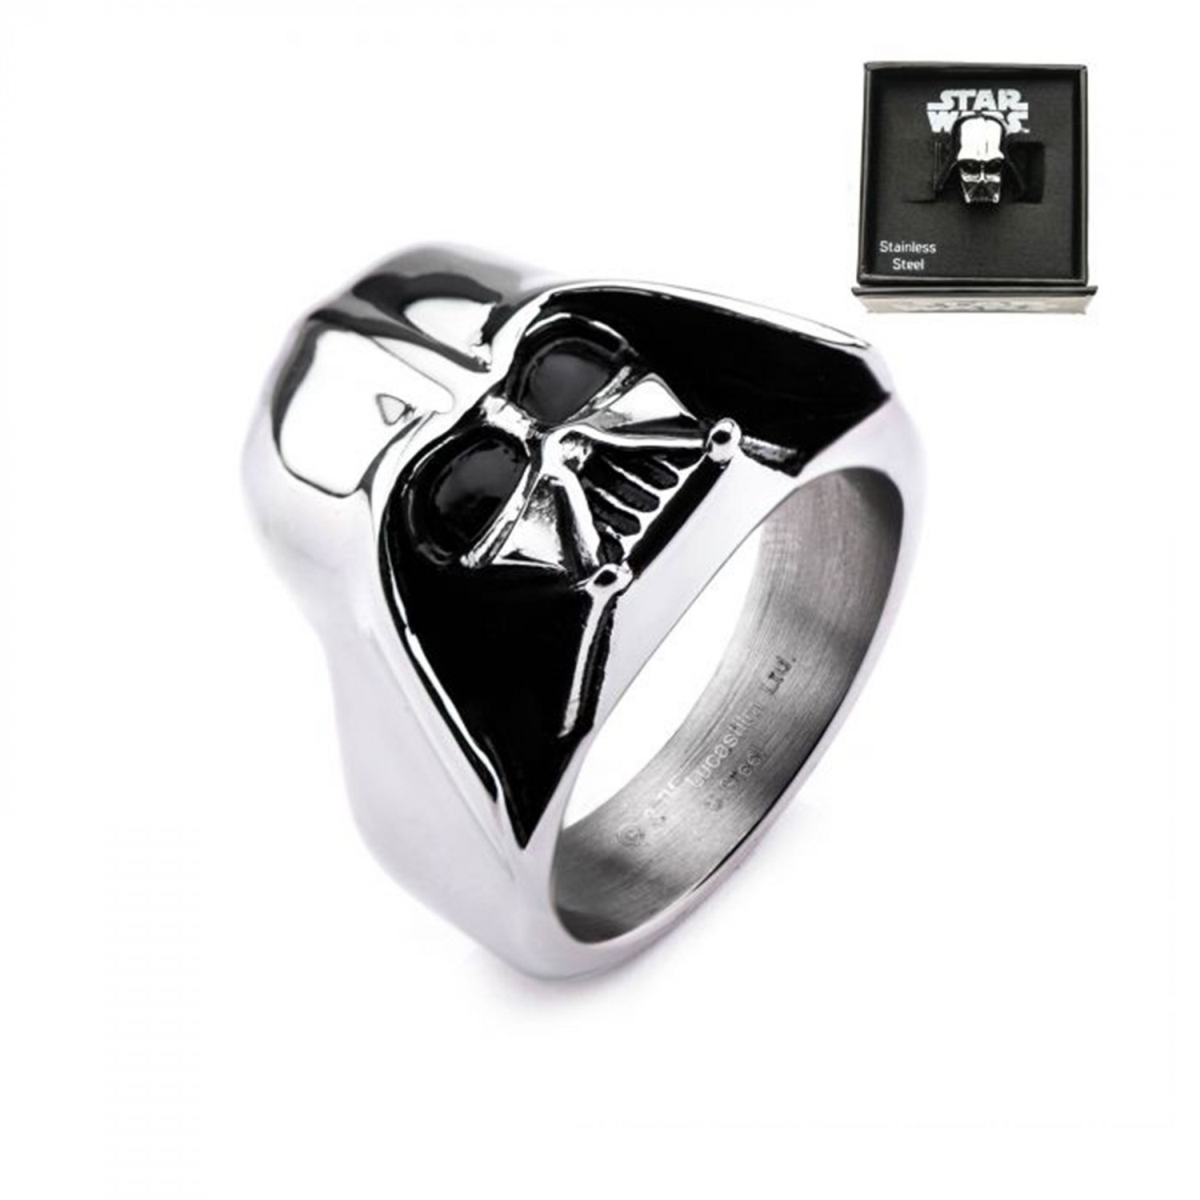 Picture of Star Wars 872494-size12 Star Wars Darth Vader Silver Helmet Ring - Size 12